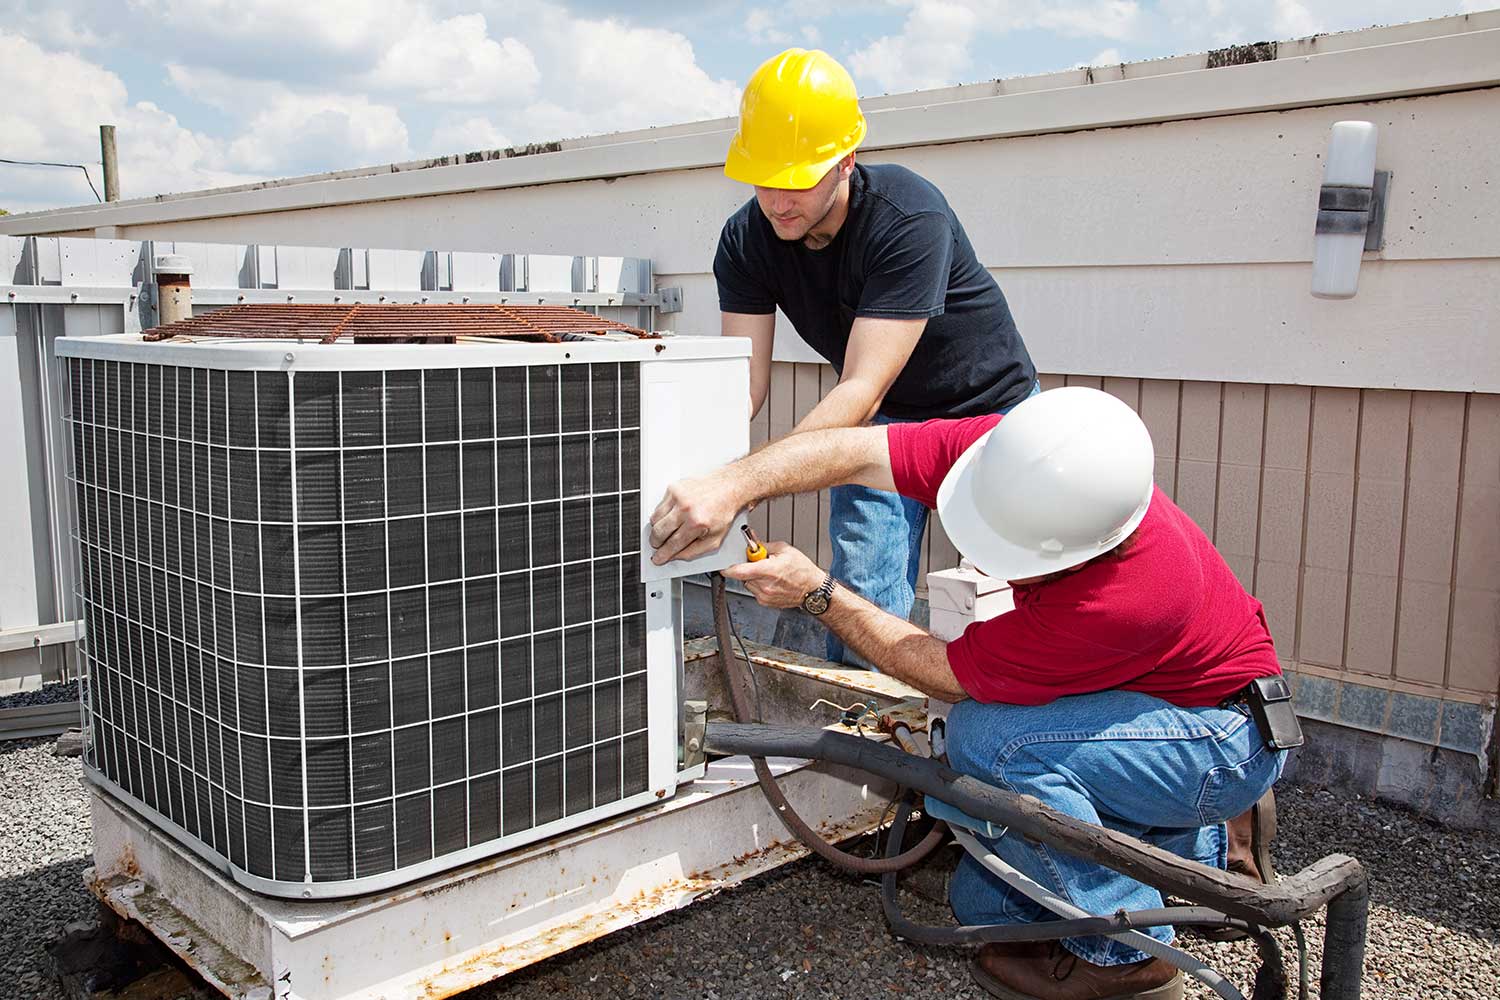 Heating and A/C savings add up